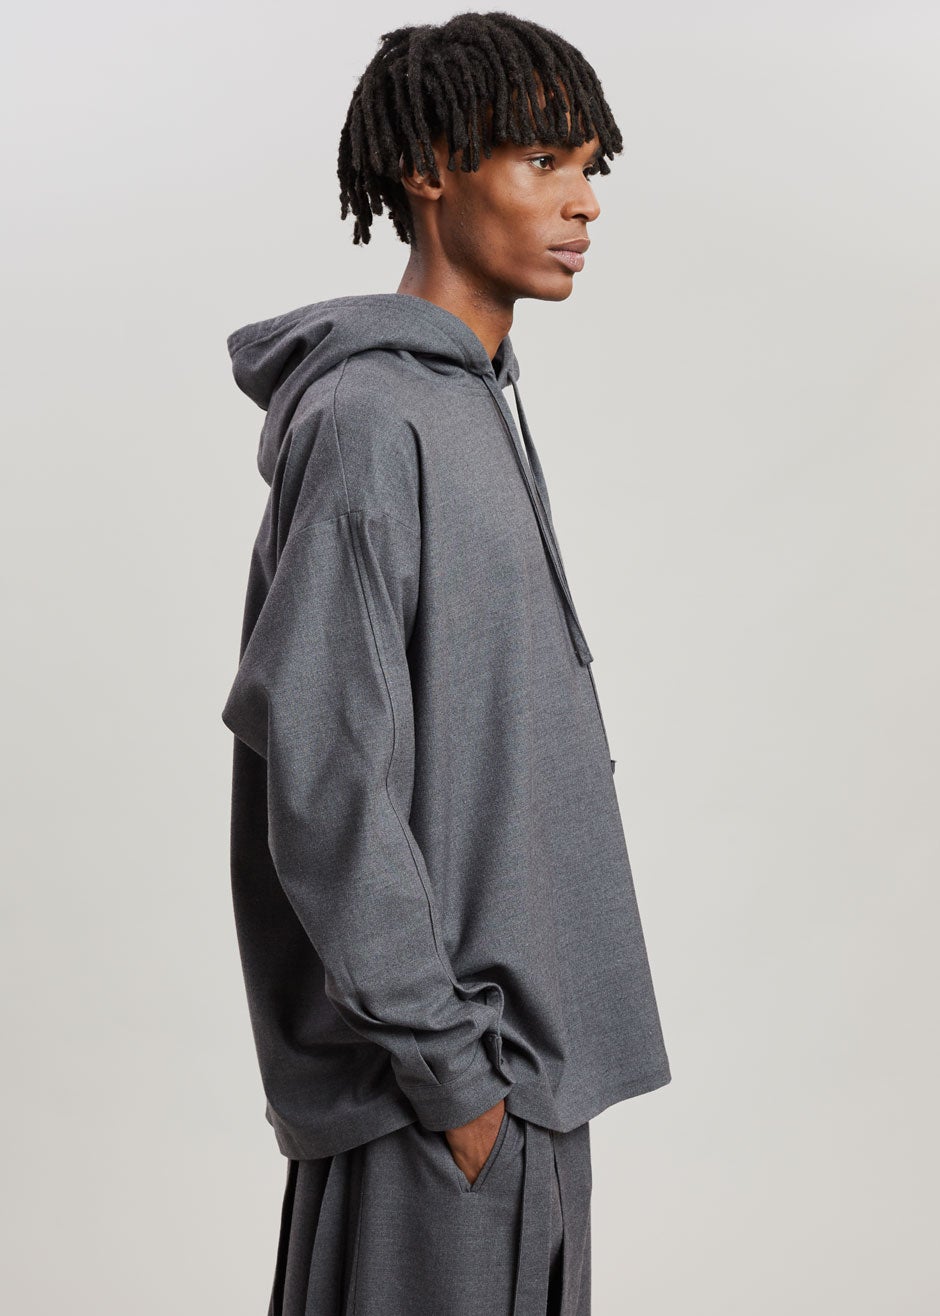 Heith Flanelle Hoodie - Charcoal - 3